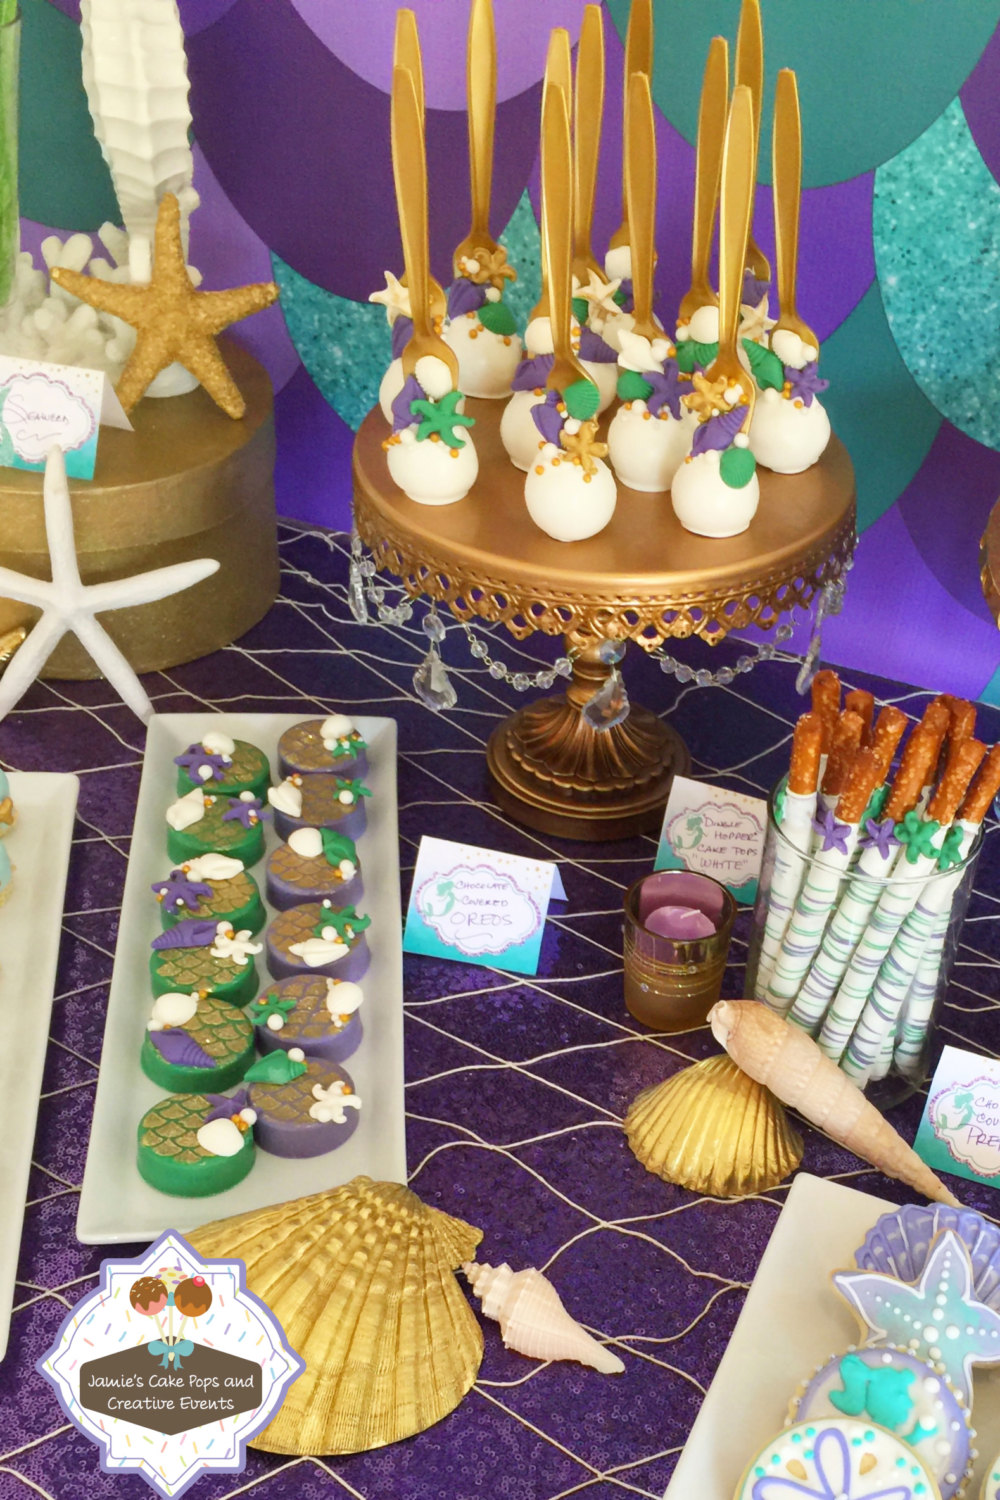 Diy Birthday Blog The Little Mermaid Under The Sea Birthday Party Chocolate Covered Oreo Cookies